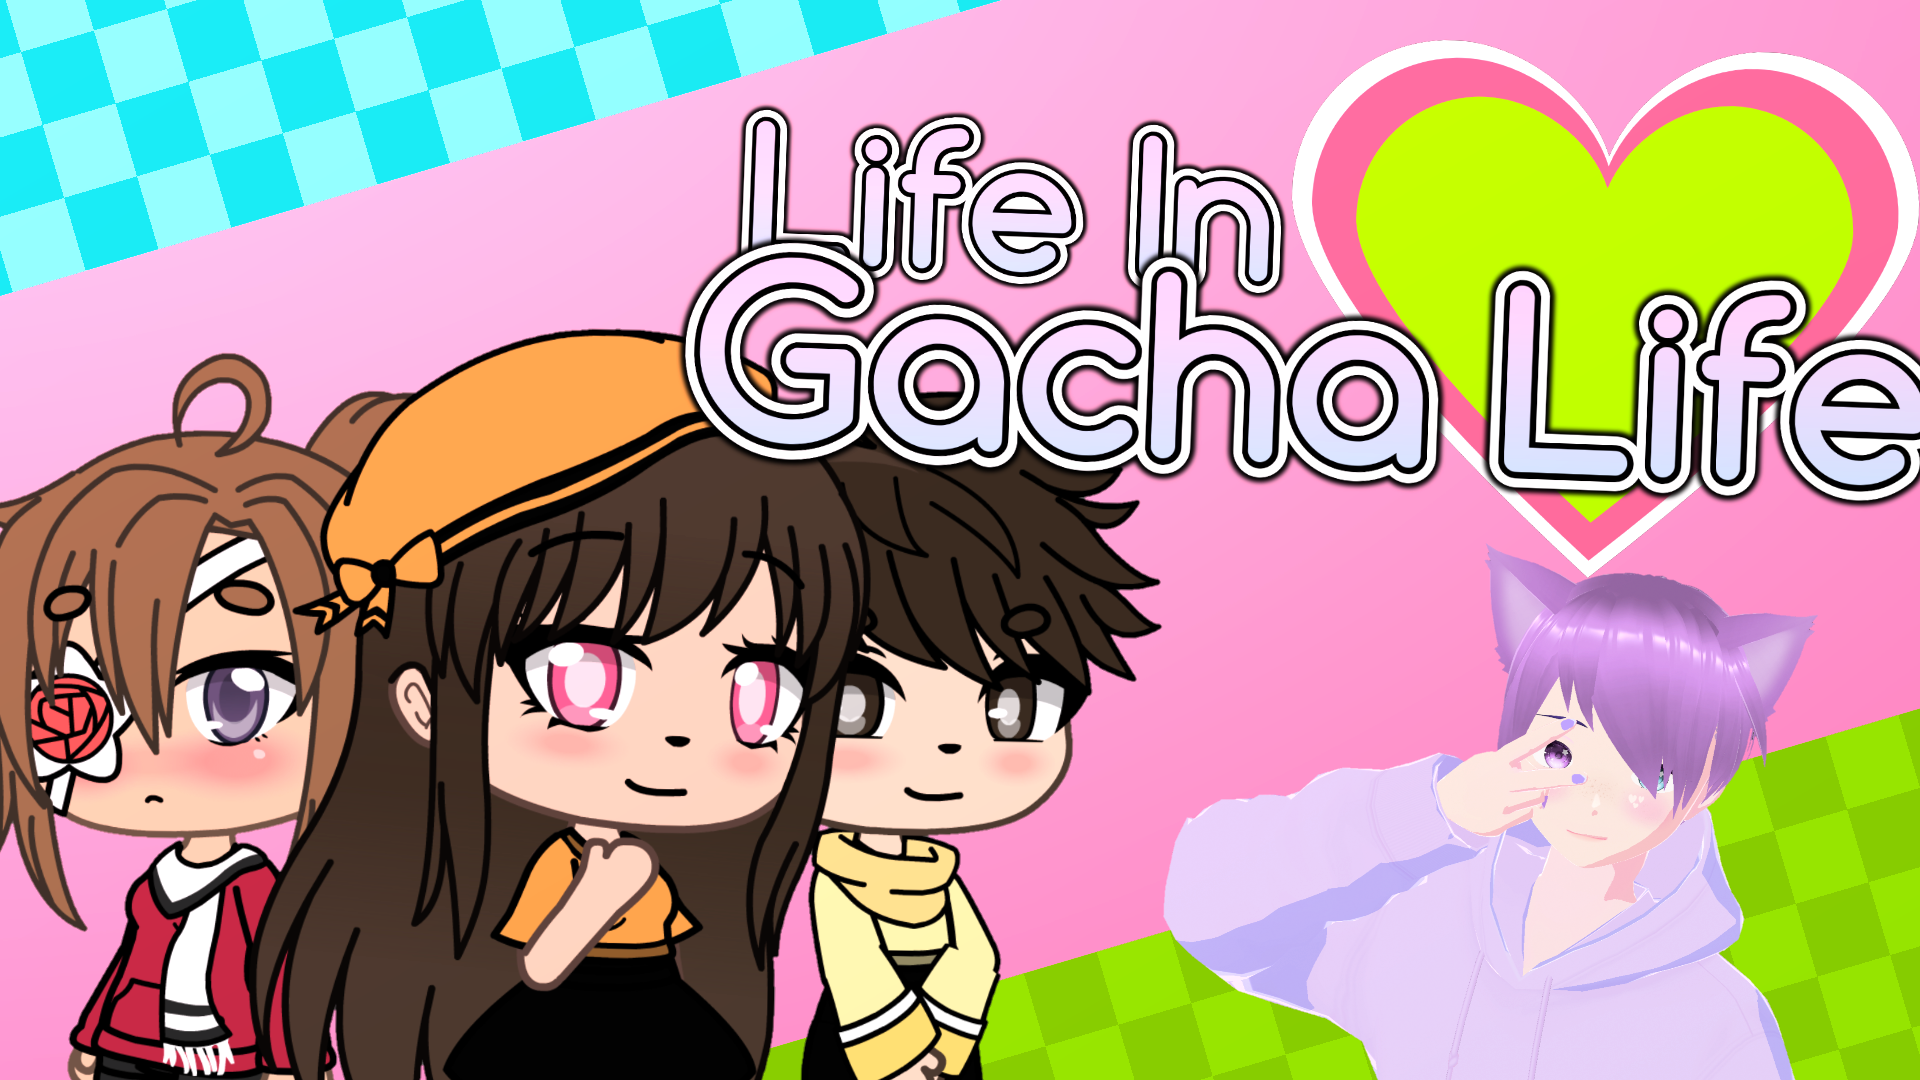 I downloaded Gacha Cute! (When it says it's not safe or a virus is